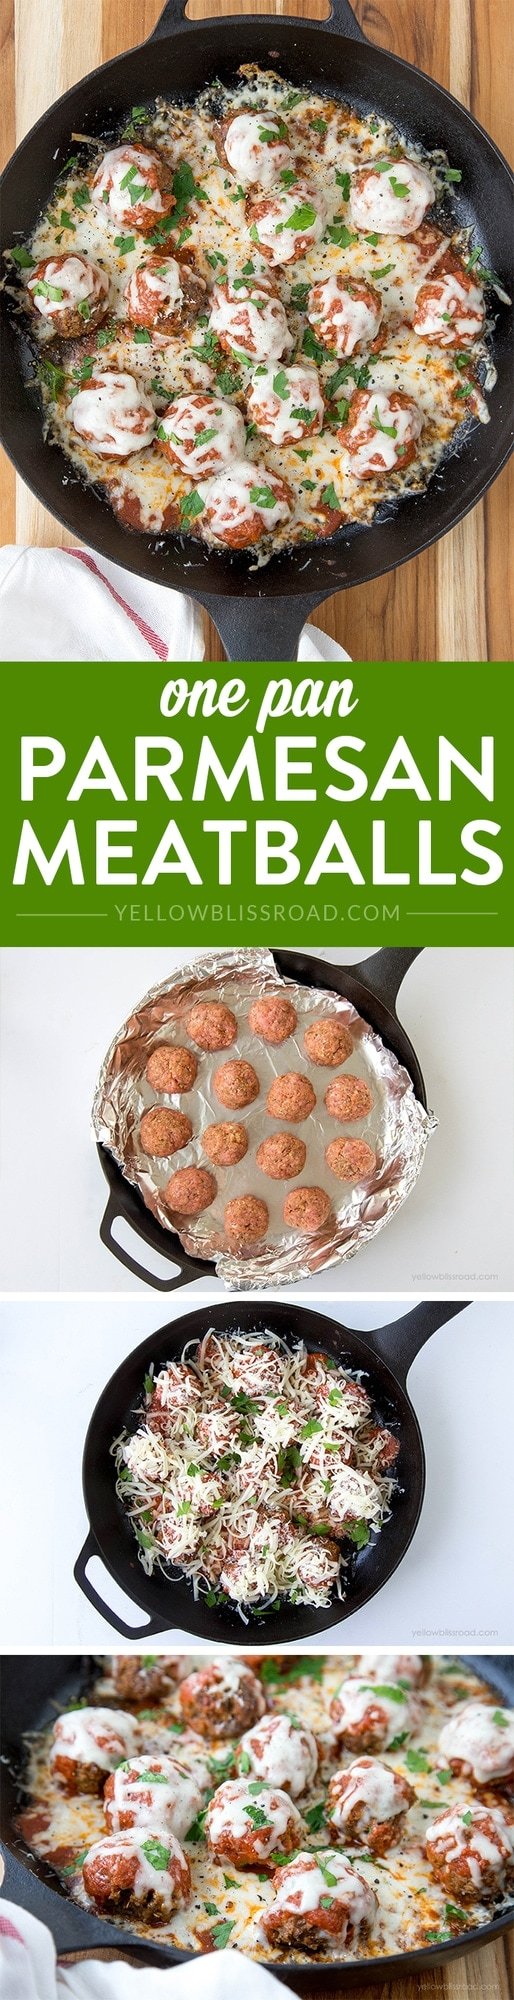 One Pan Parmesan Meatballs - Easy, delicious, homemade meatballs - Great weeknight dinner recipe